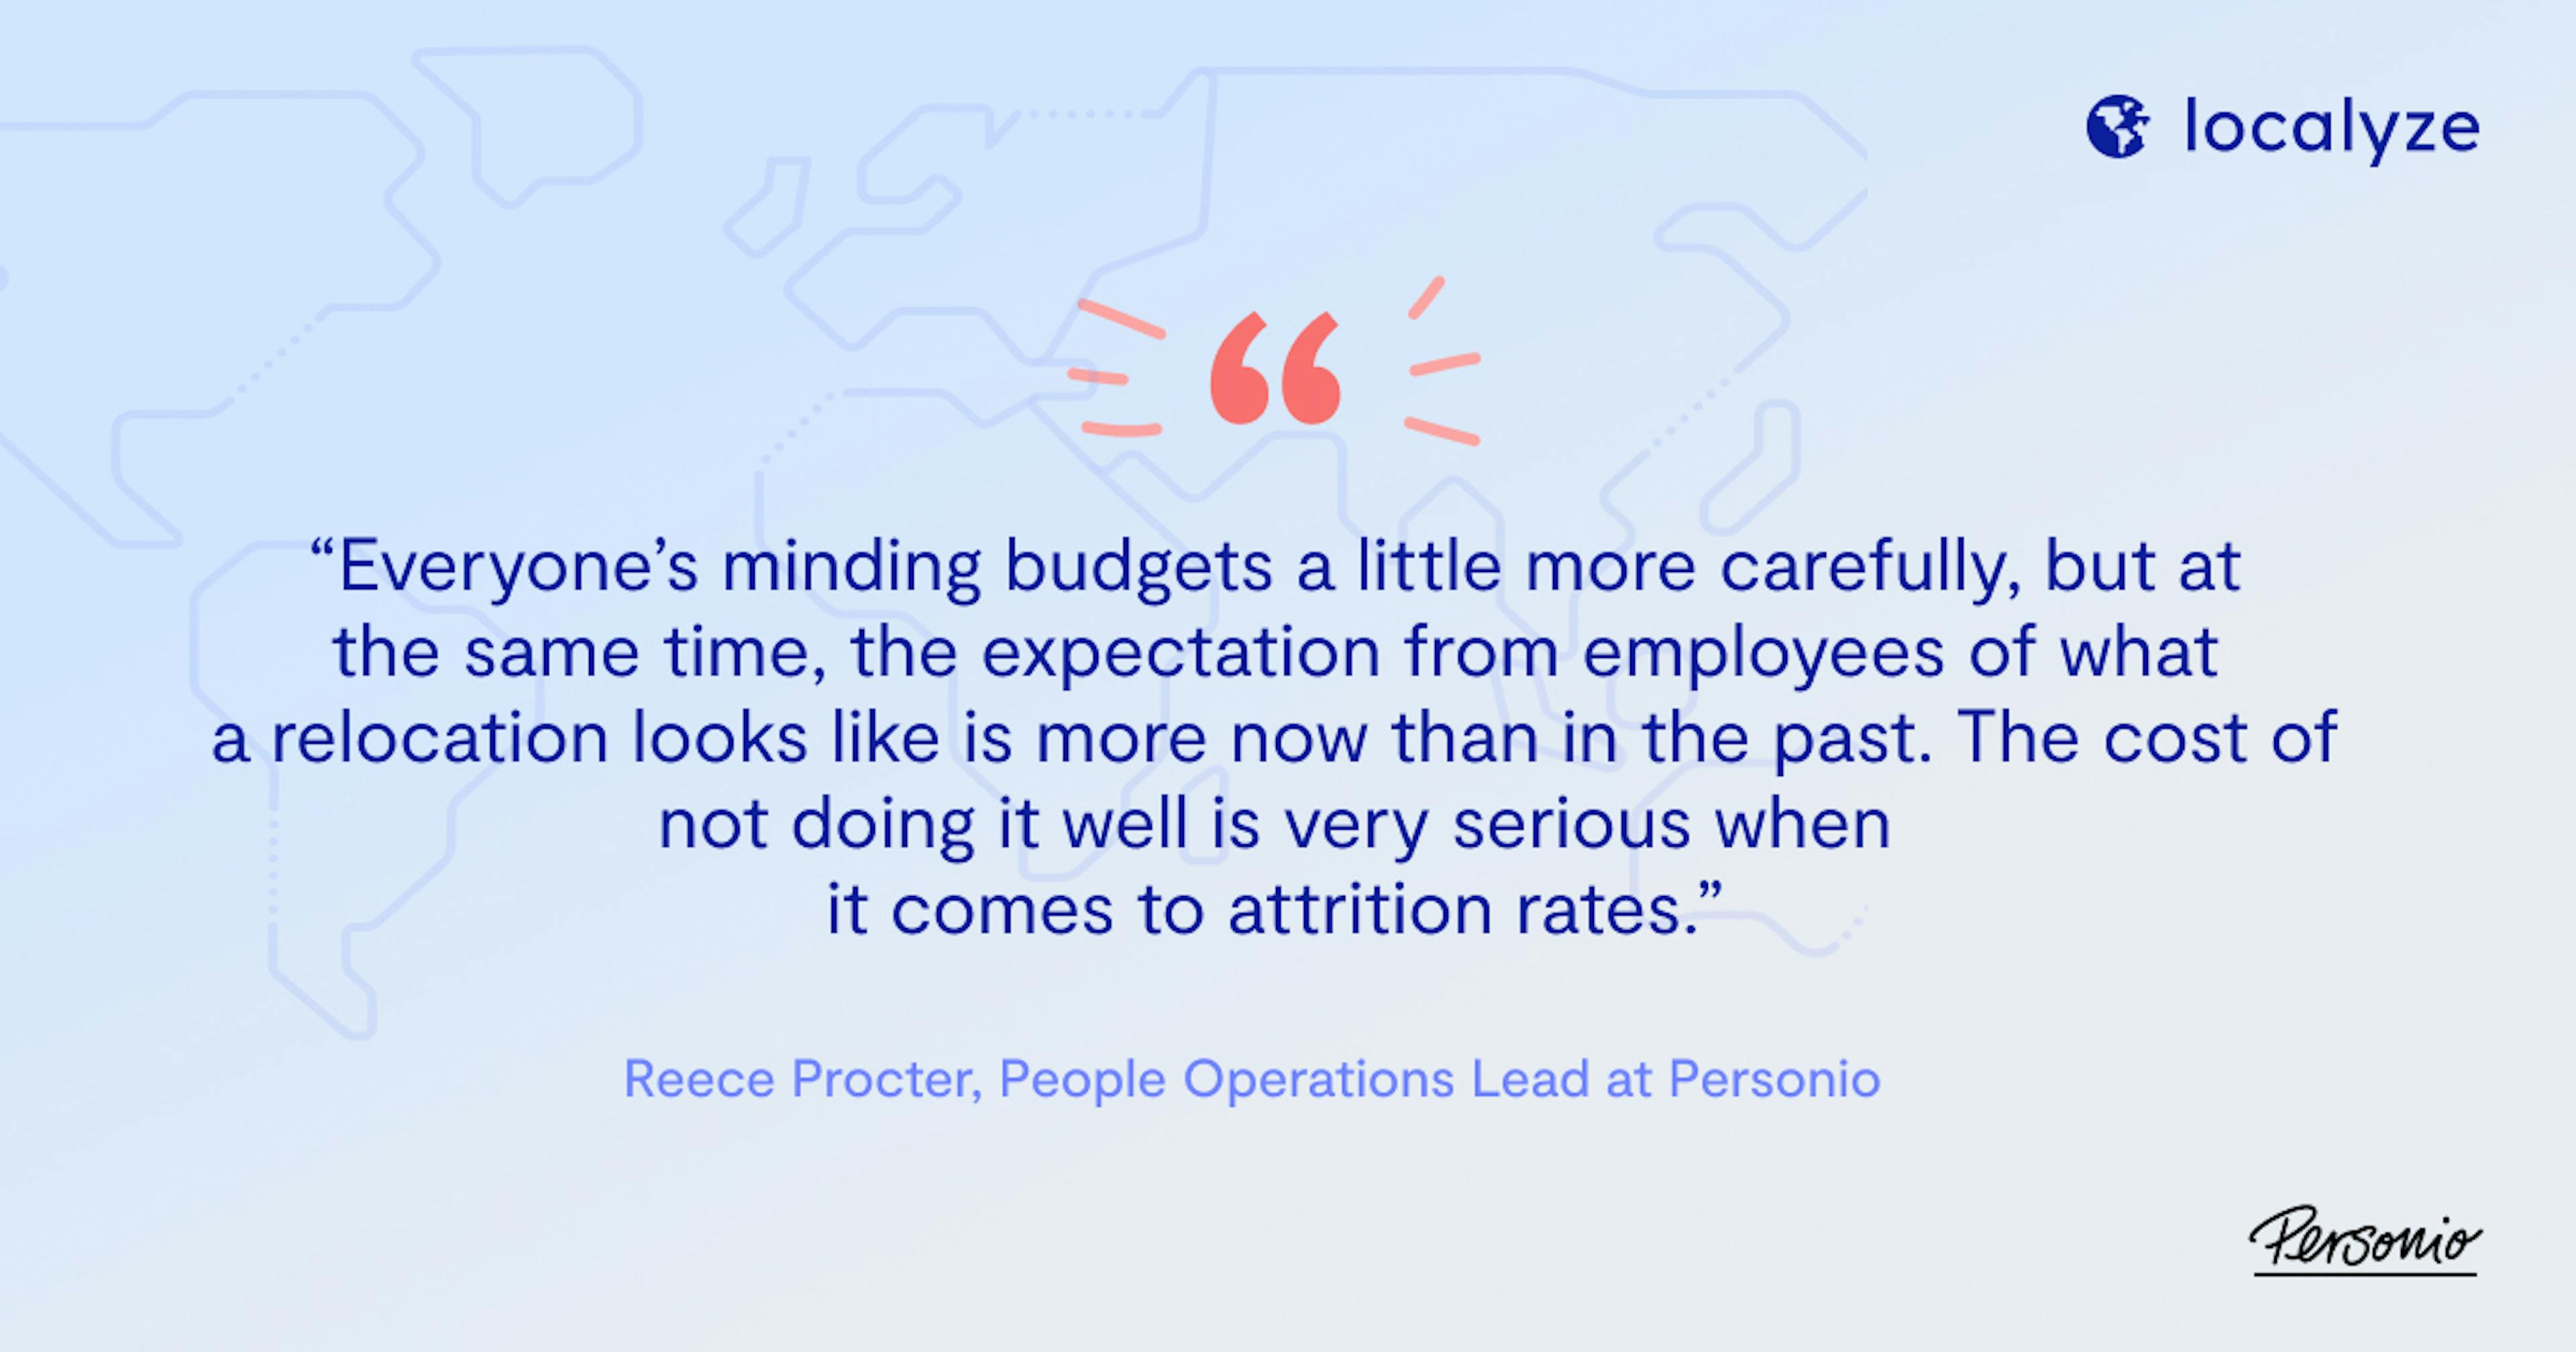 "Everyone's minding budgets a little more carefully. The cost of not doing it well is very serious."